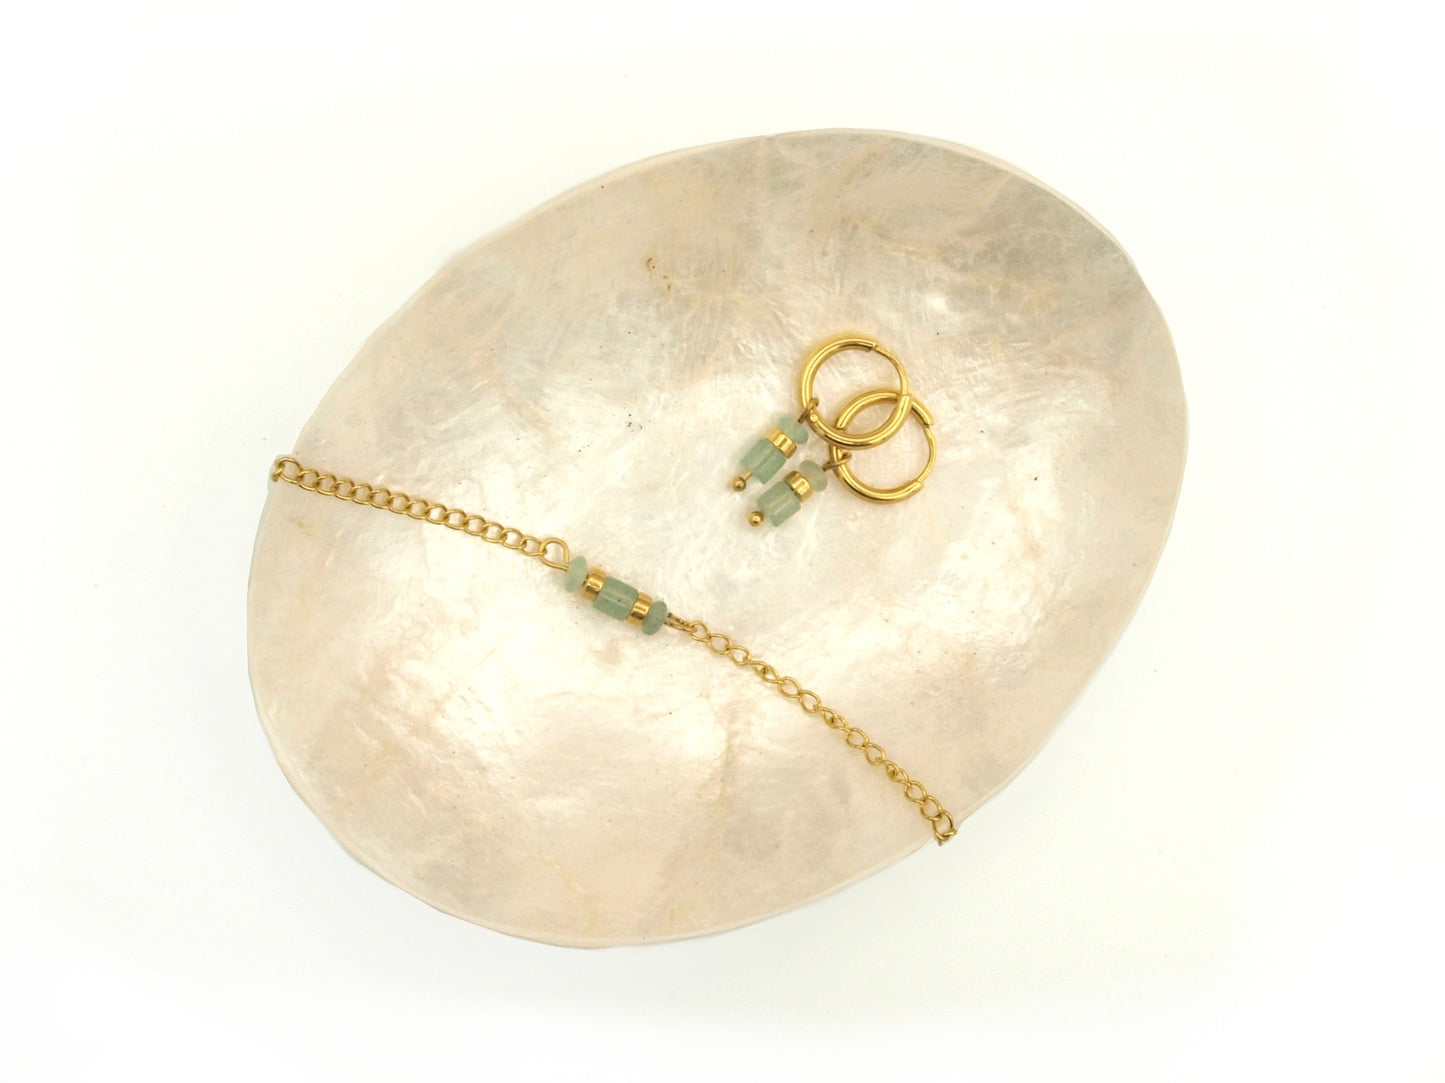 Necklace Iris aventurine, silver and gold stainless steel